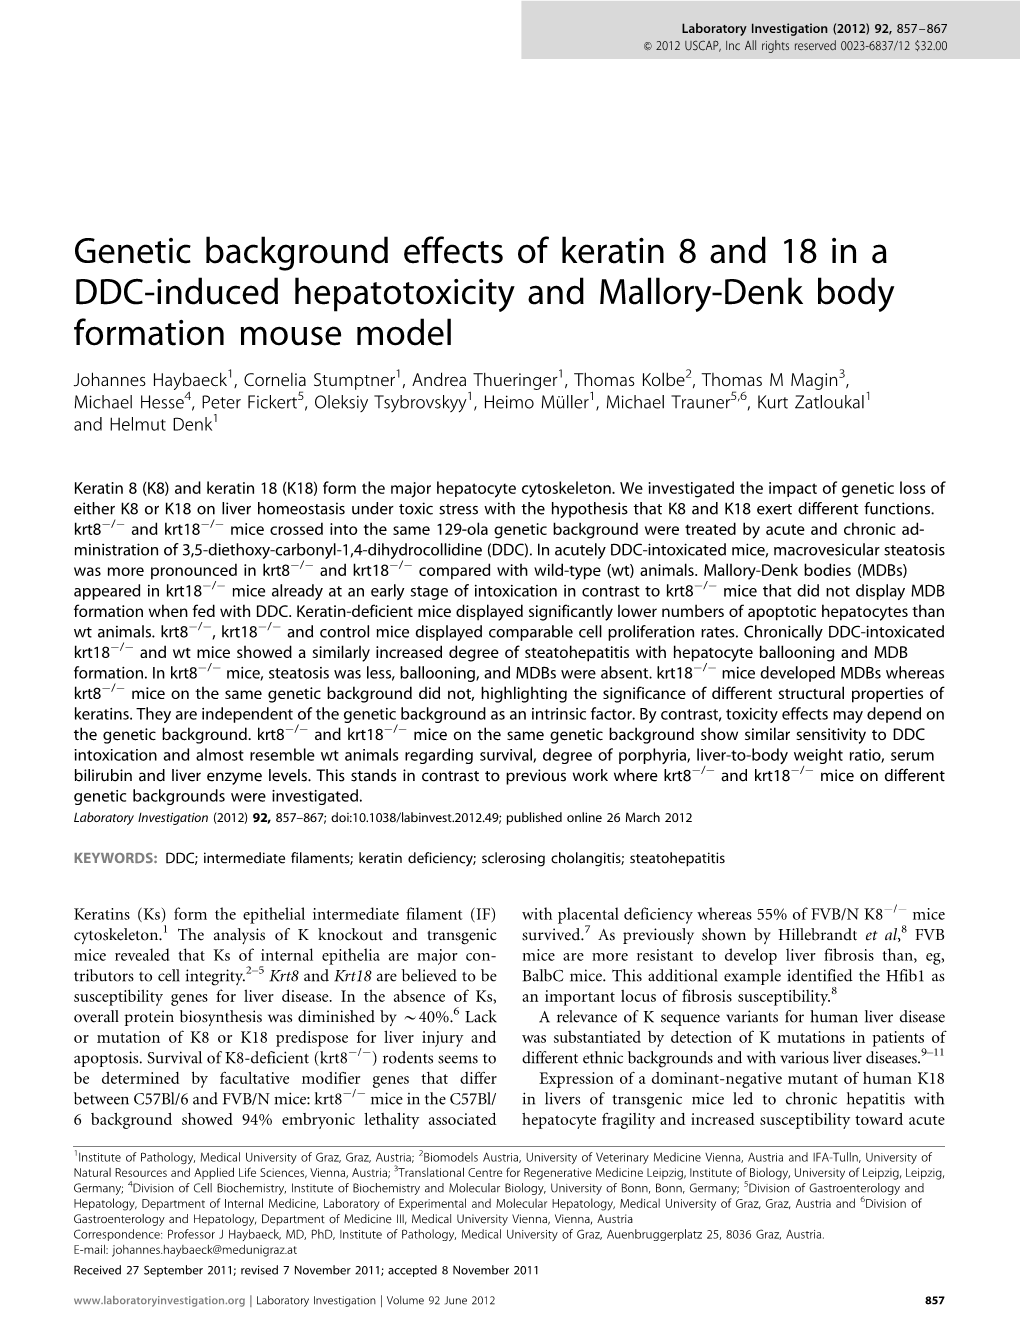 Genetic Background Effects of Keratin 8 and 18 in a DDC-Induced Hepatotoxicity and Mallory-Denk Body Formation Mouse Model